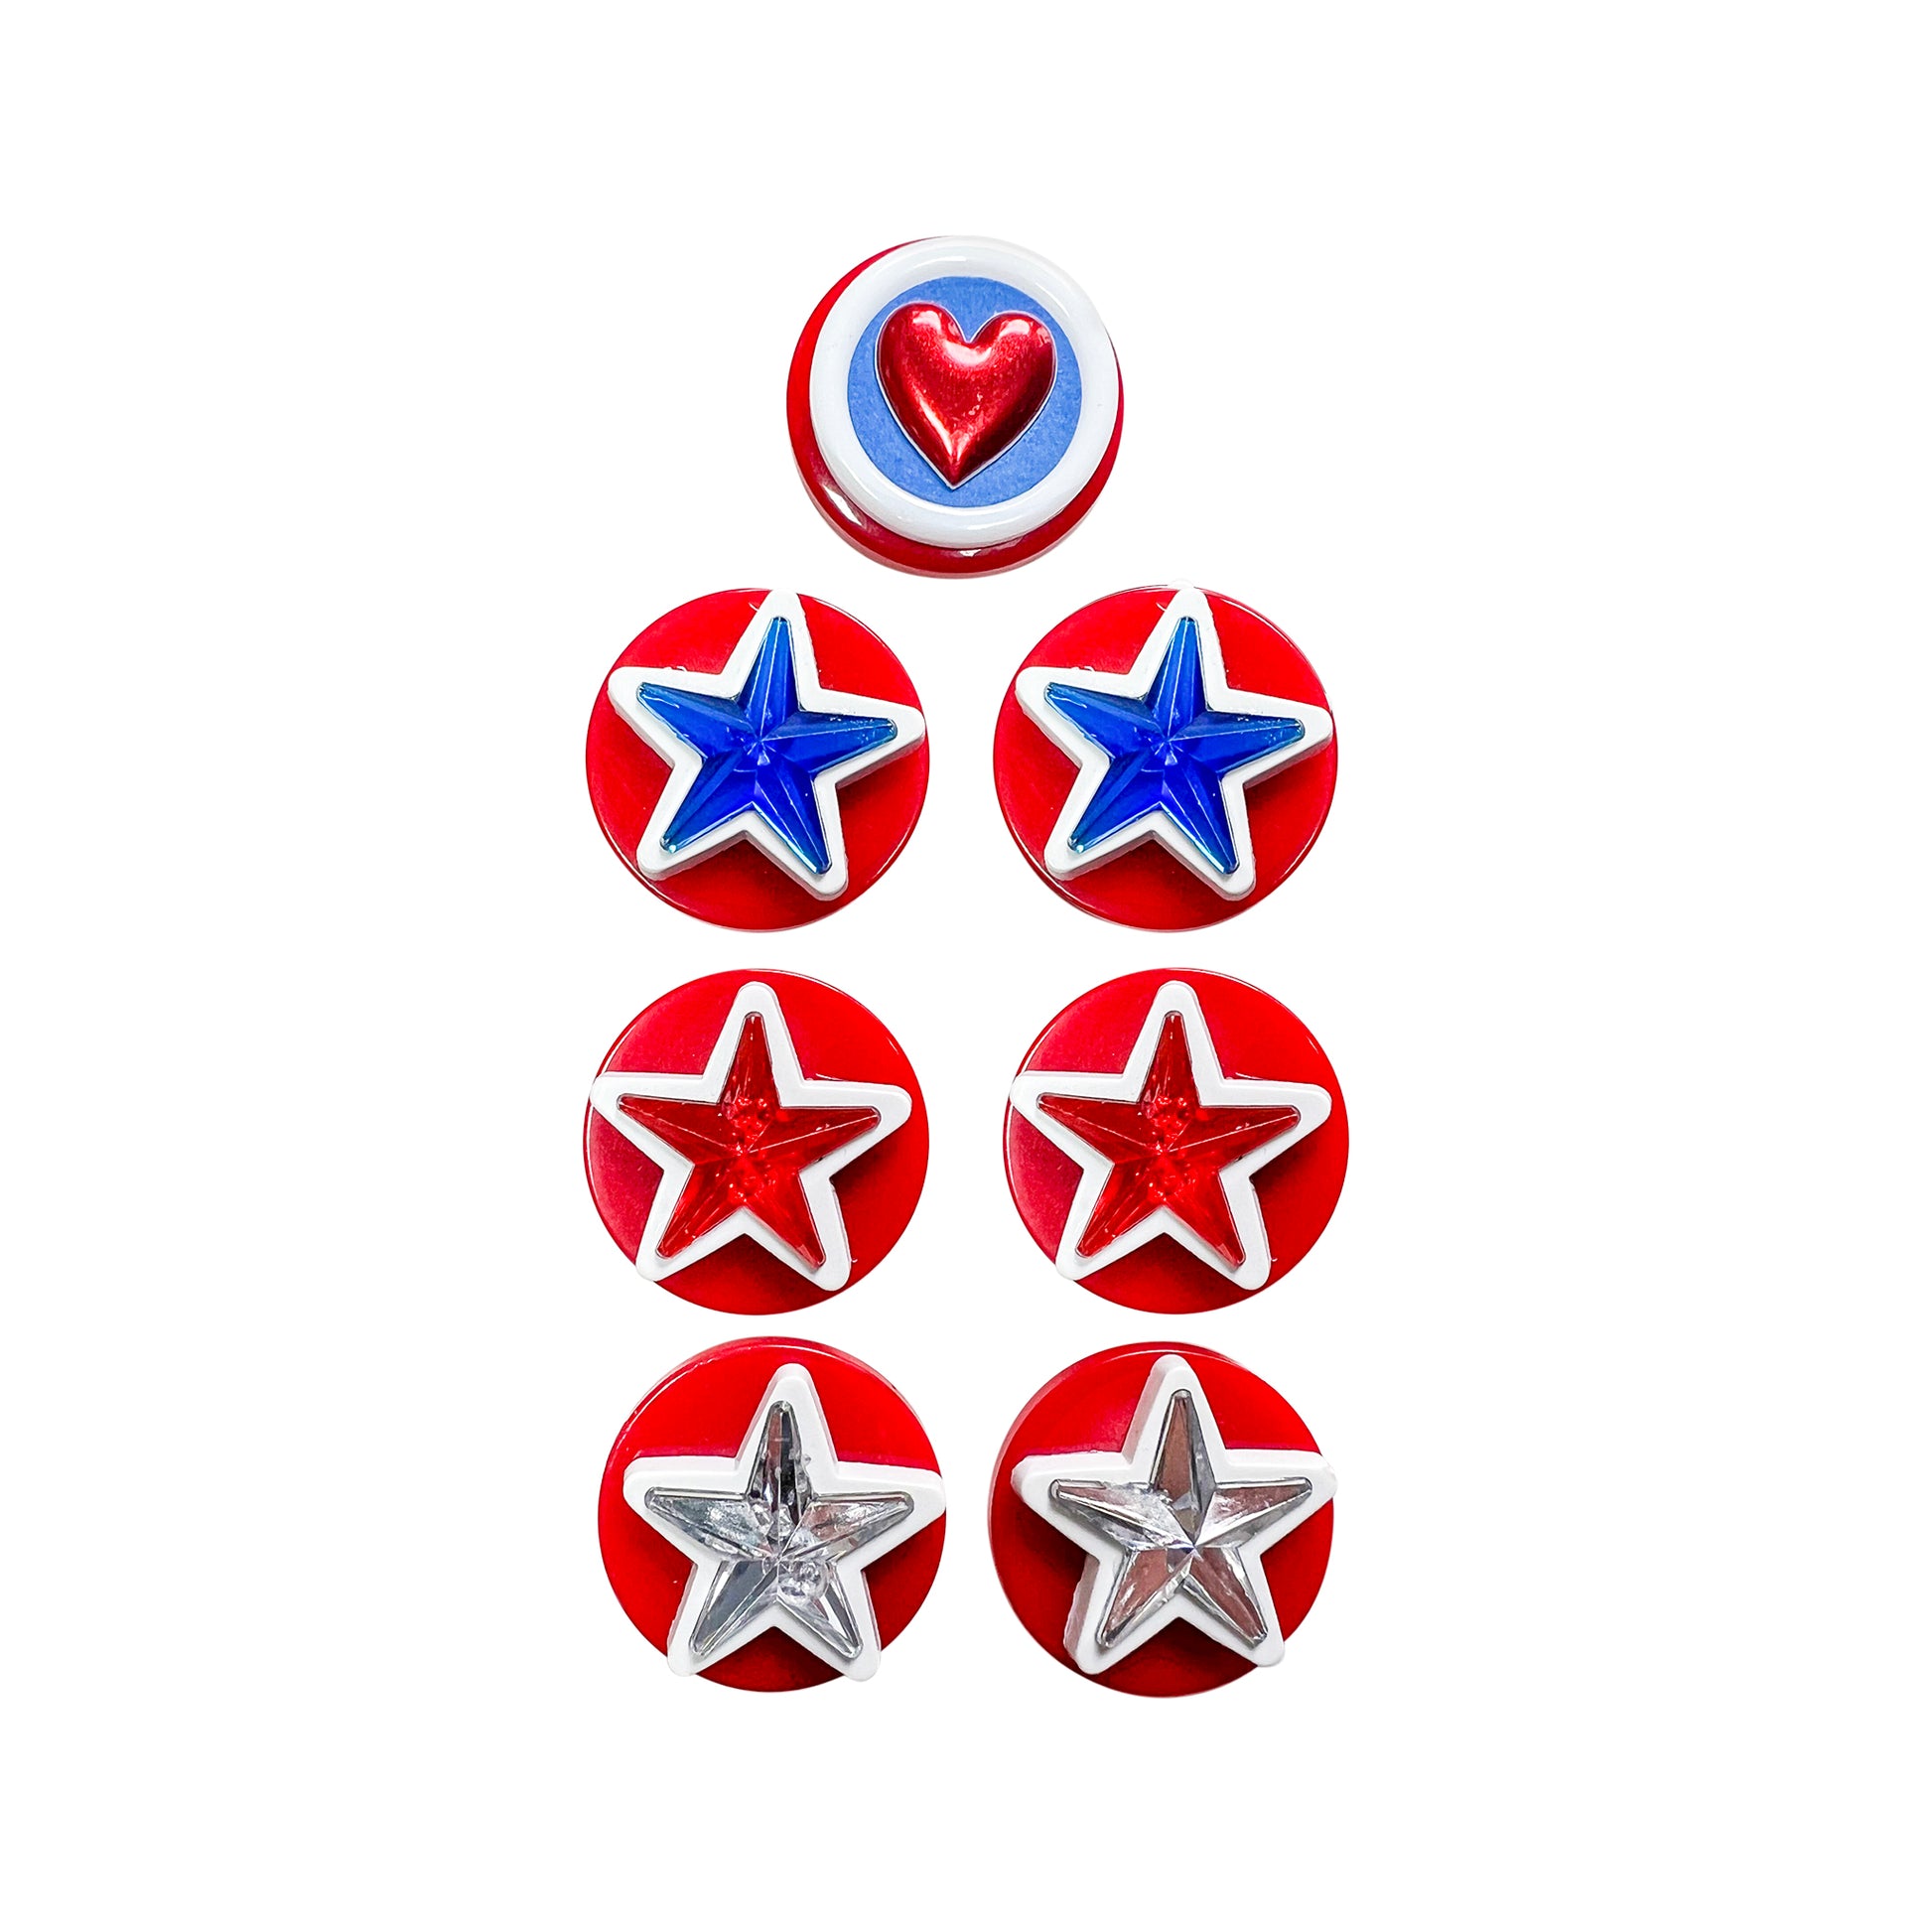 Glass Wrappings' set of 7 red button embellishments. 6 topped with 3 pairs of red, silver, and blue stars, and 1 red heart.pink paper roses, and 1 with a dark pink gem heart.